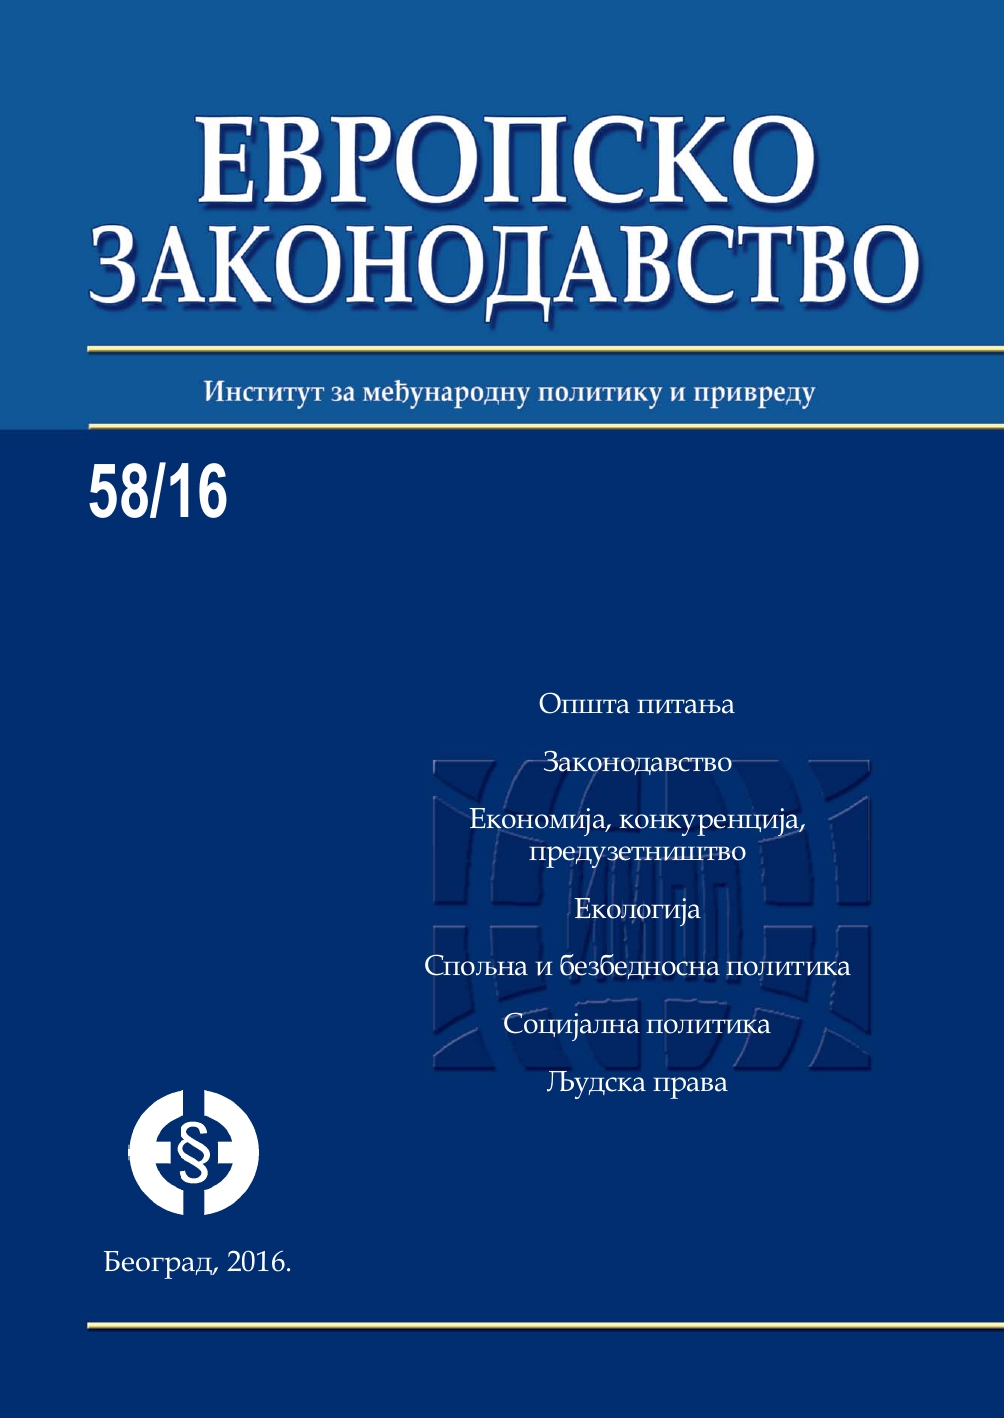 Analysis of students' attitudes about the level of consumer protection in Serbia in relation to the European Union Cover Image